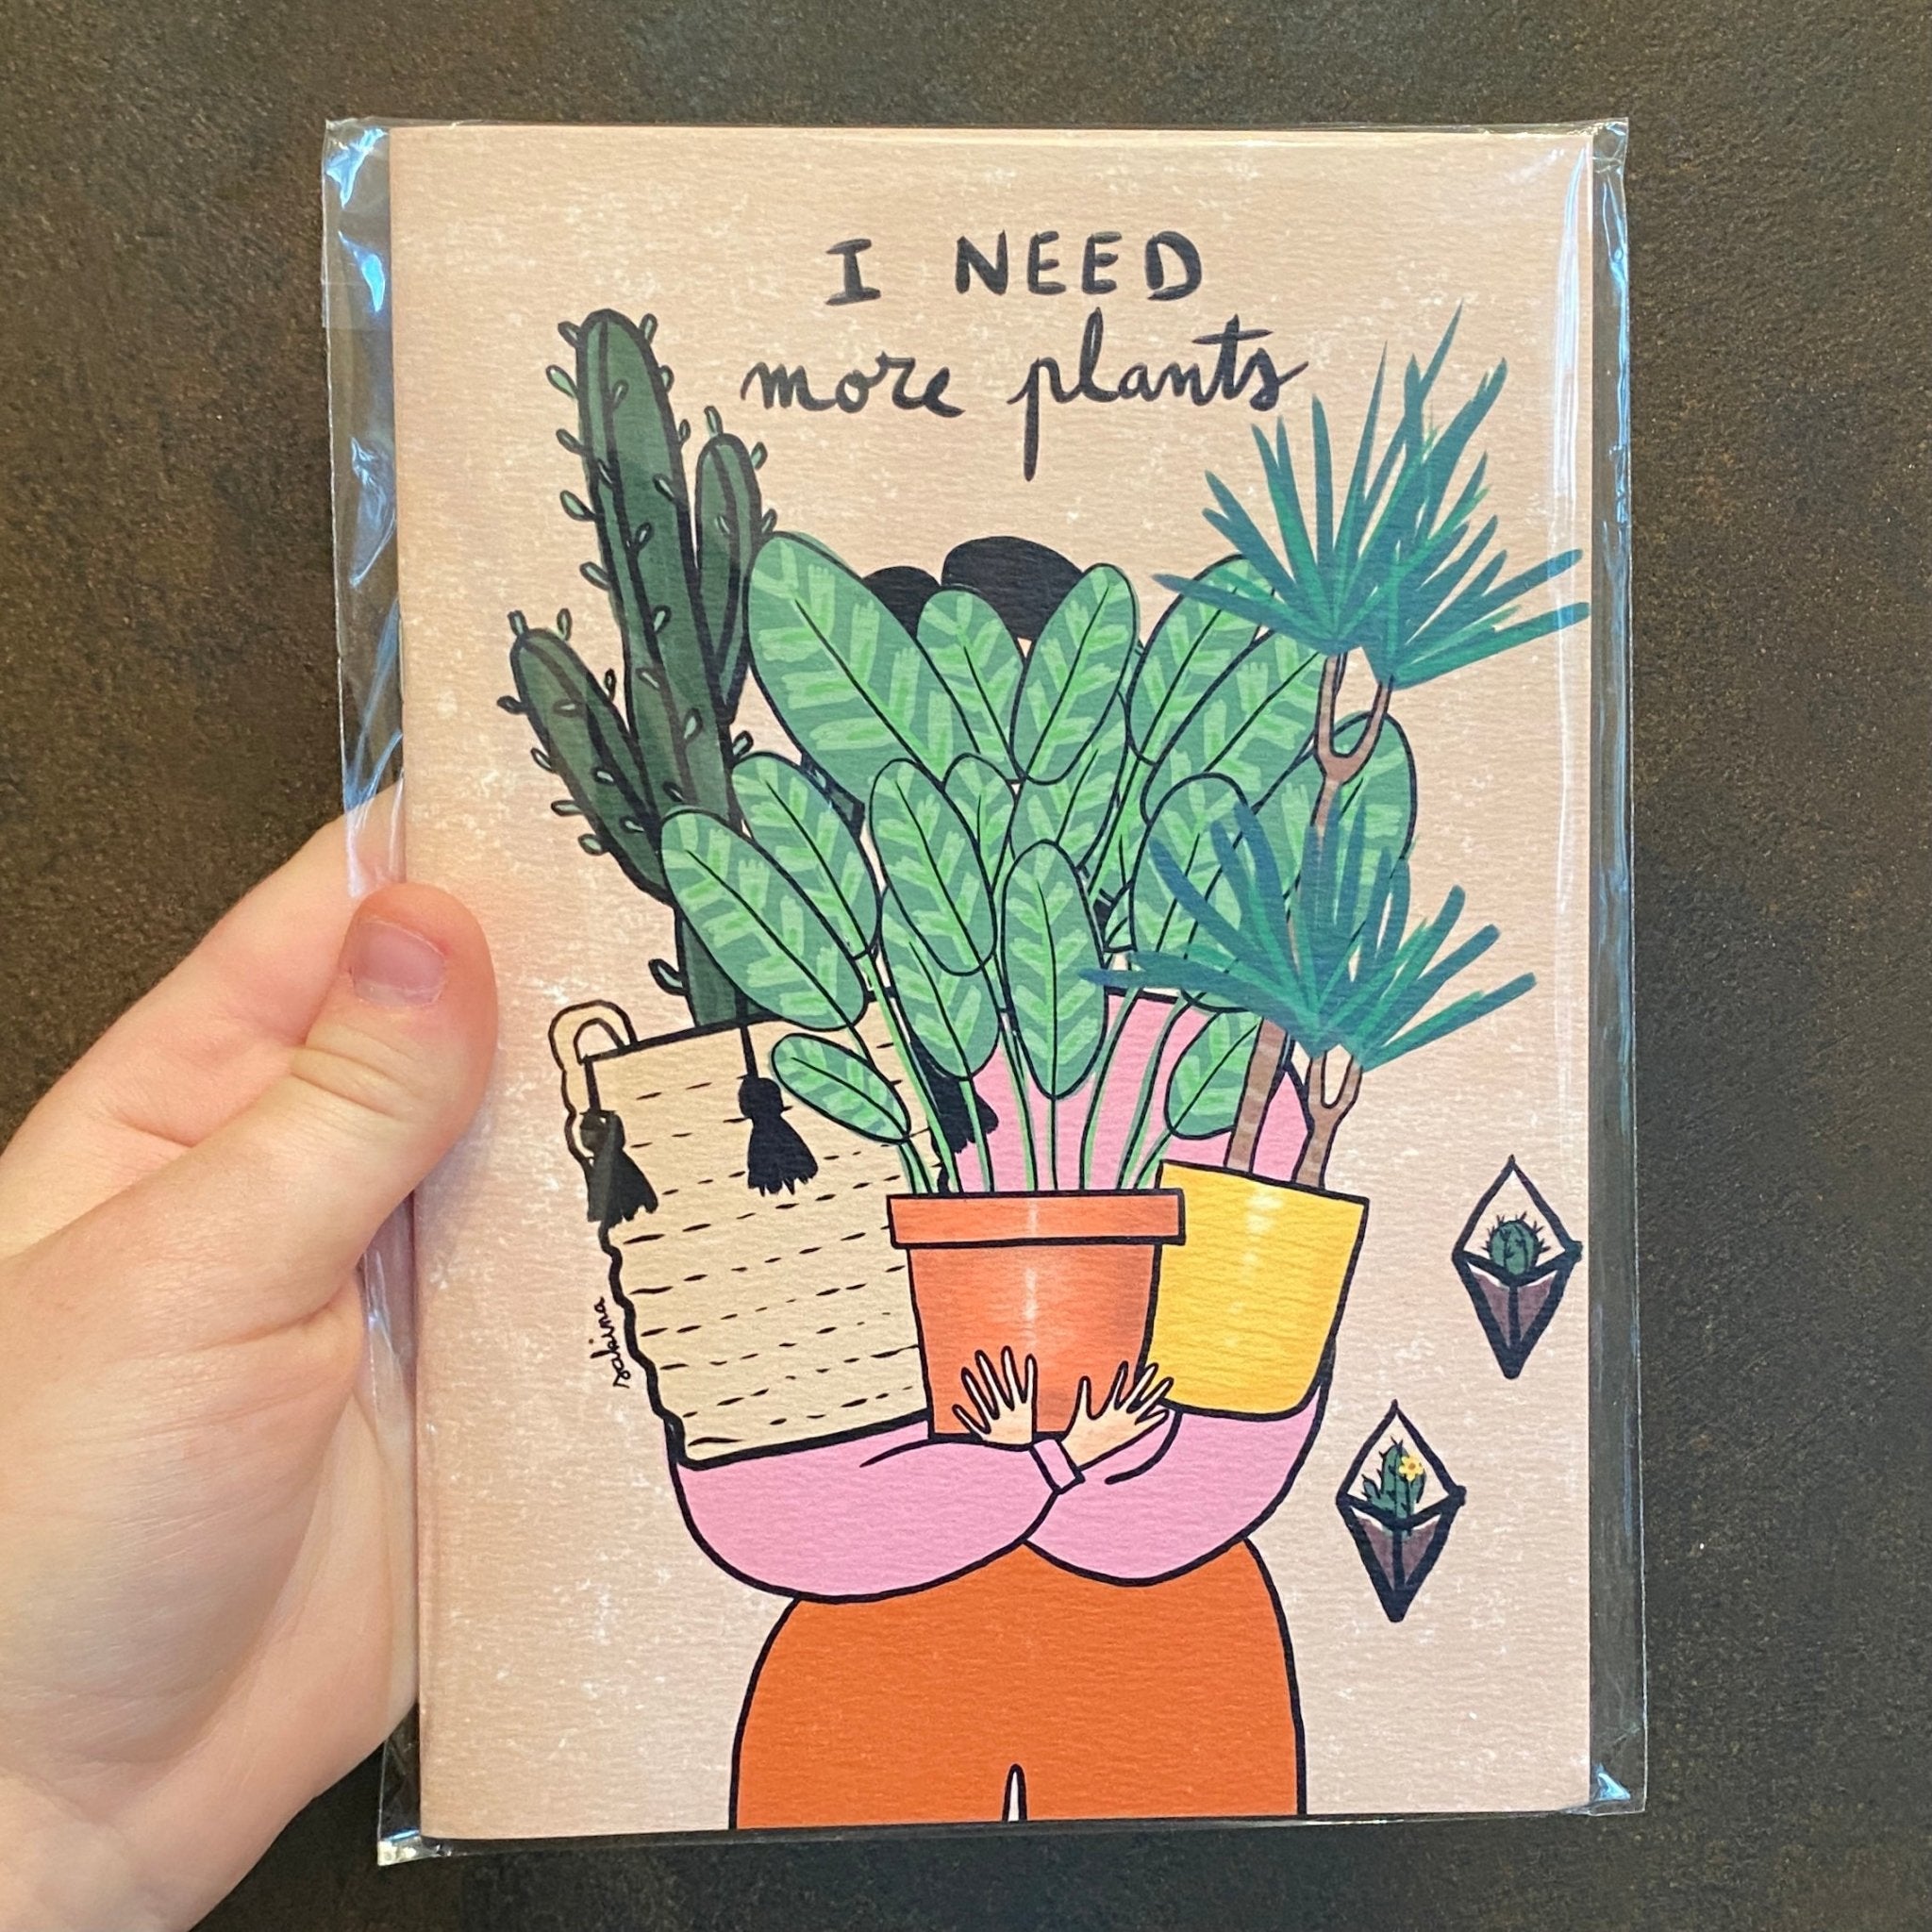 I Need More Plants Notebook A5 - grow urban. UK